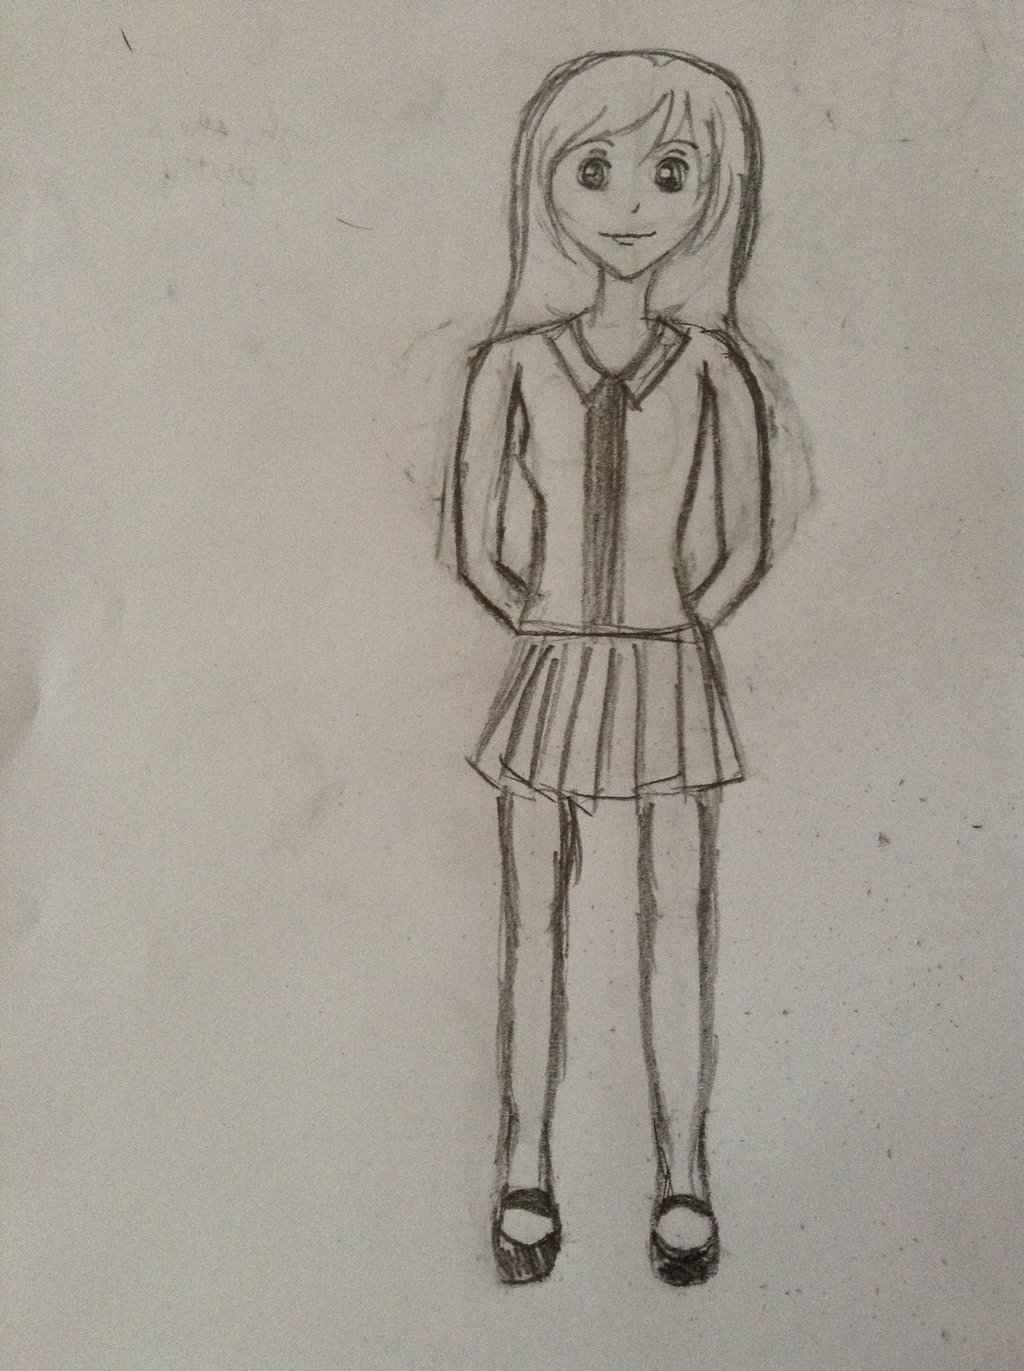 30+ Trends Ideas Pencil Sketch Drawing Of A Girl Full Body With Clothes
Easy